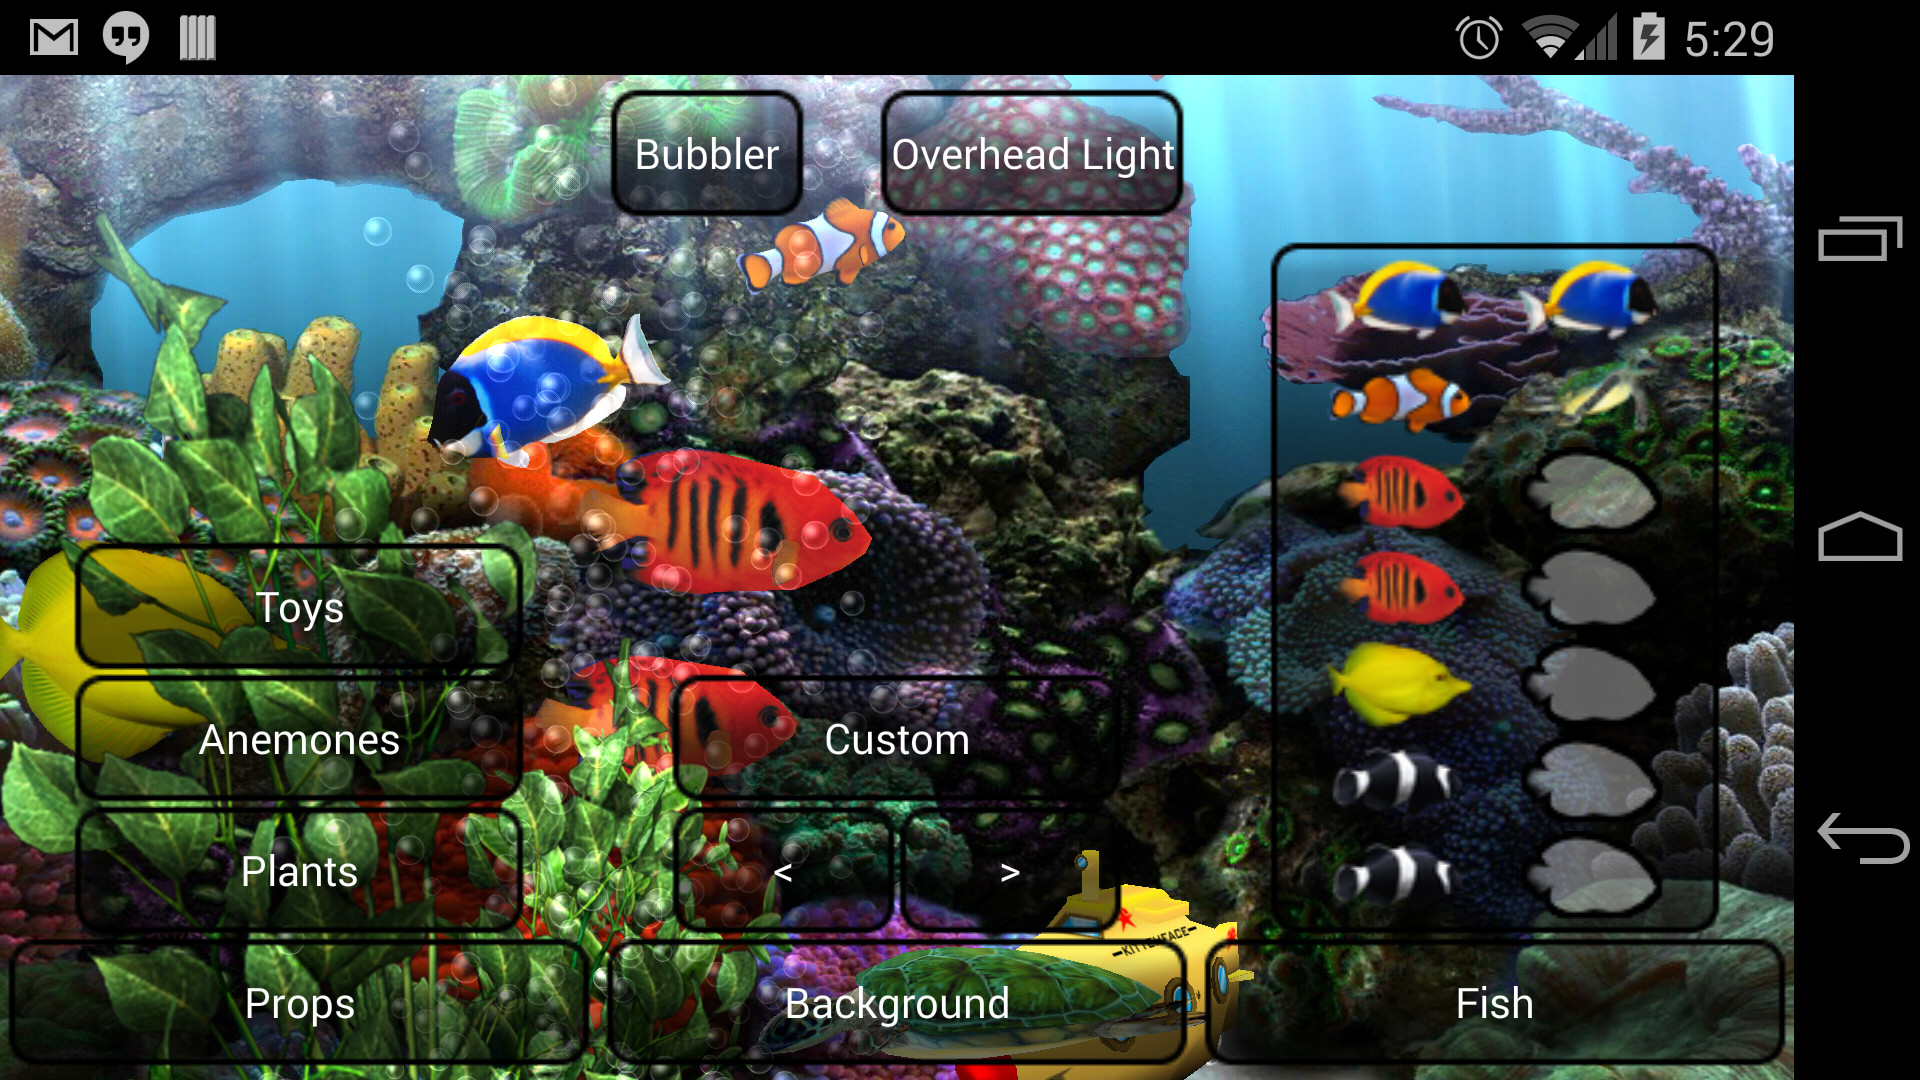 1920x1080 Aquarium live wallpaper android reviews at android quality index